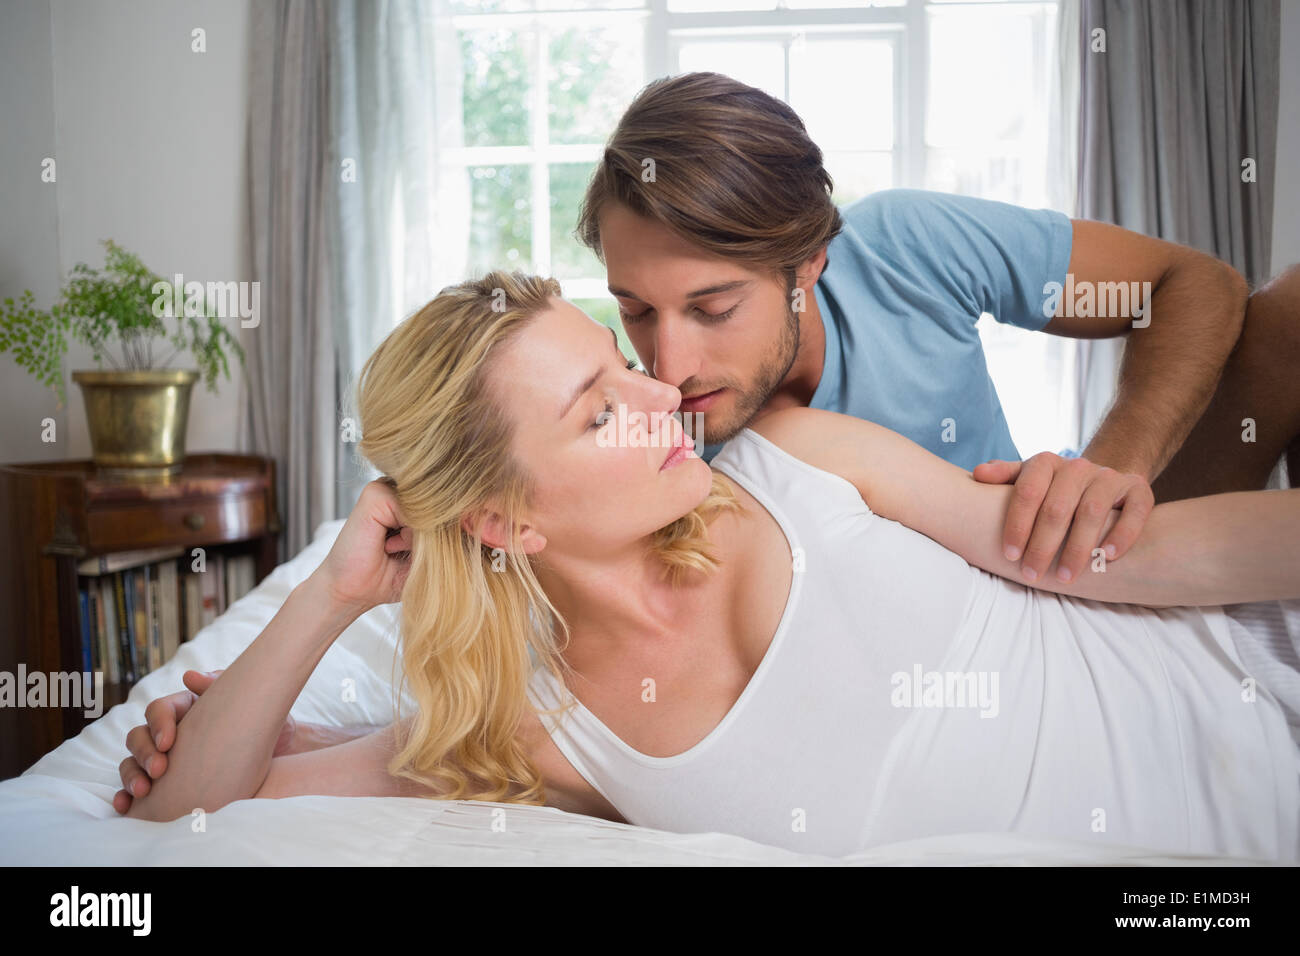 Cute couple relaxing on bed about to kiss Stock Photo